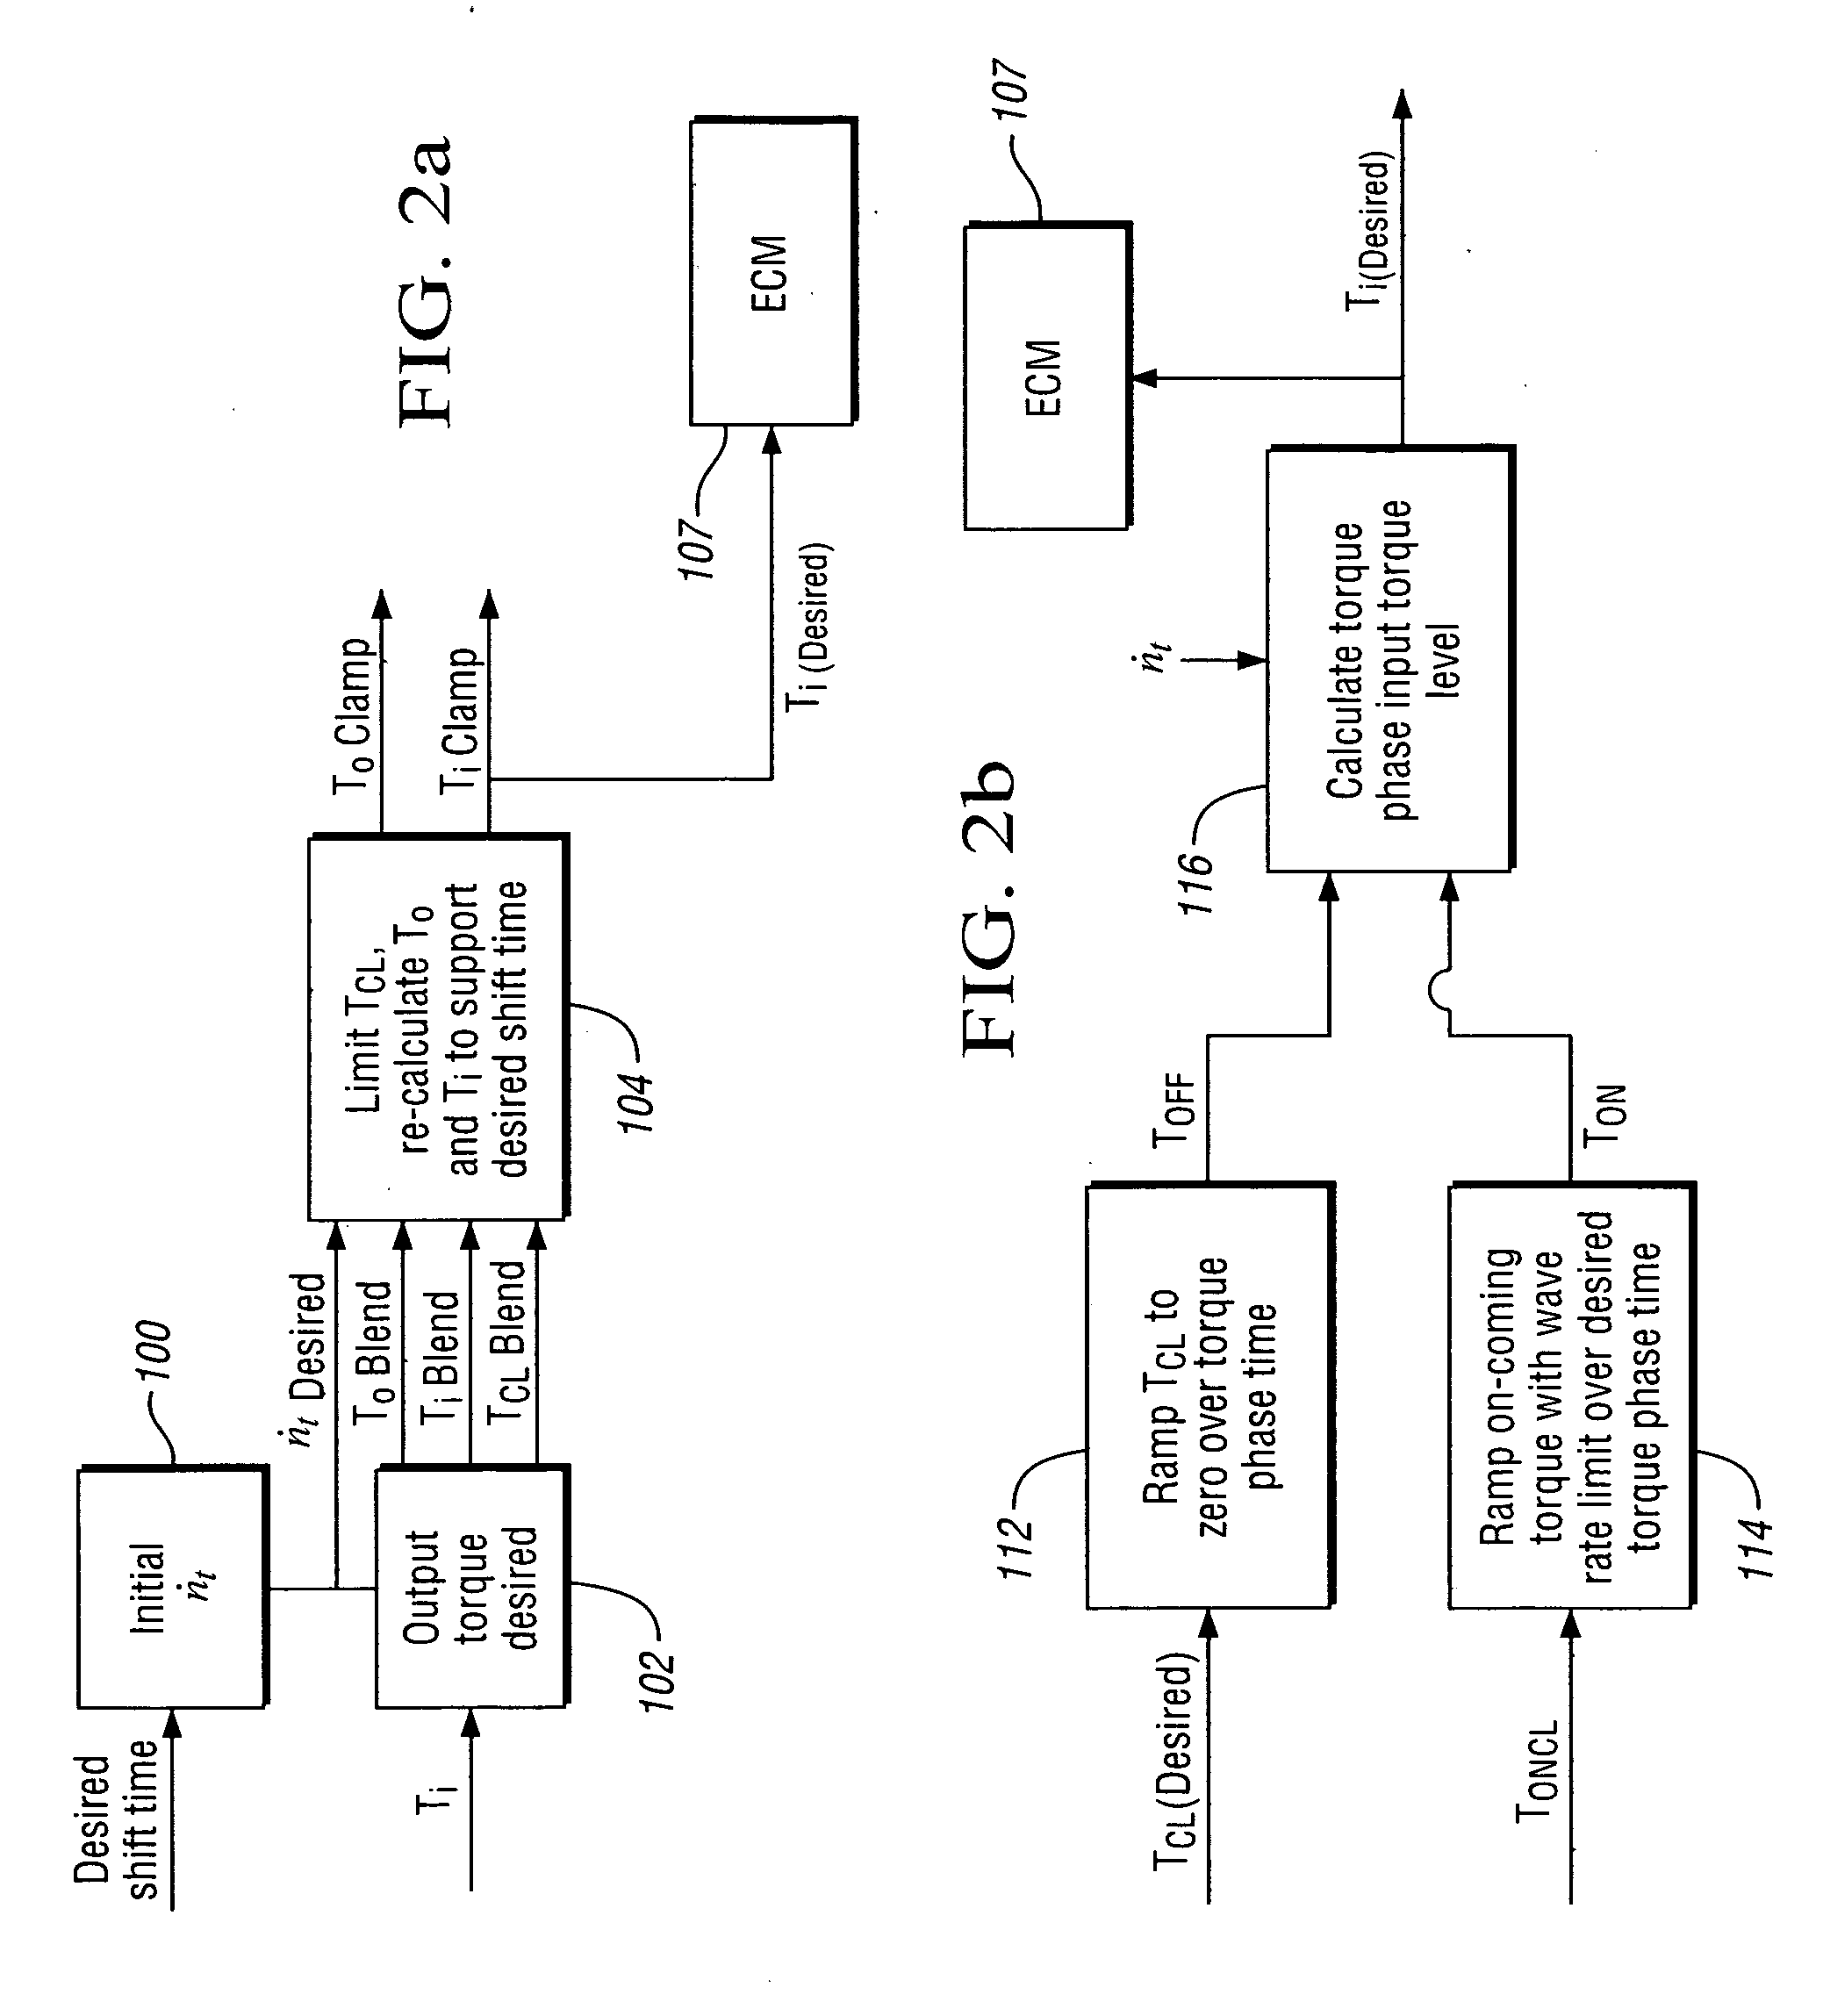 Method and apparatus for adaptive control of power-on skip through neutral downshifts